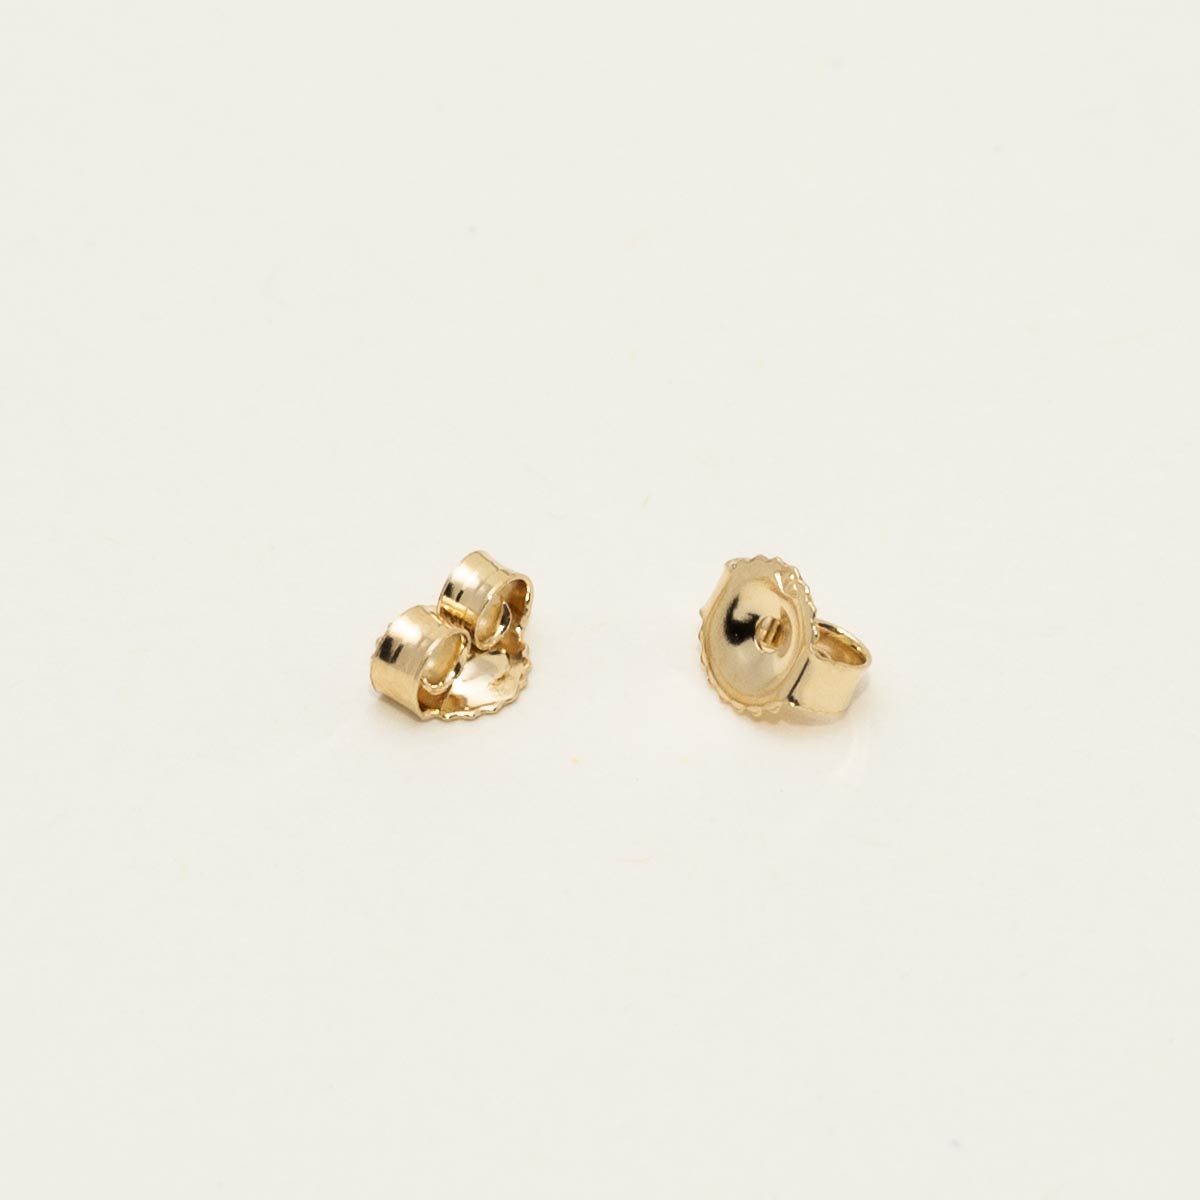 Mastoloni Cultured Freshwater Pearl Stud Earrings in 14kt Yellow Gold (6.5-7mm pearls)